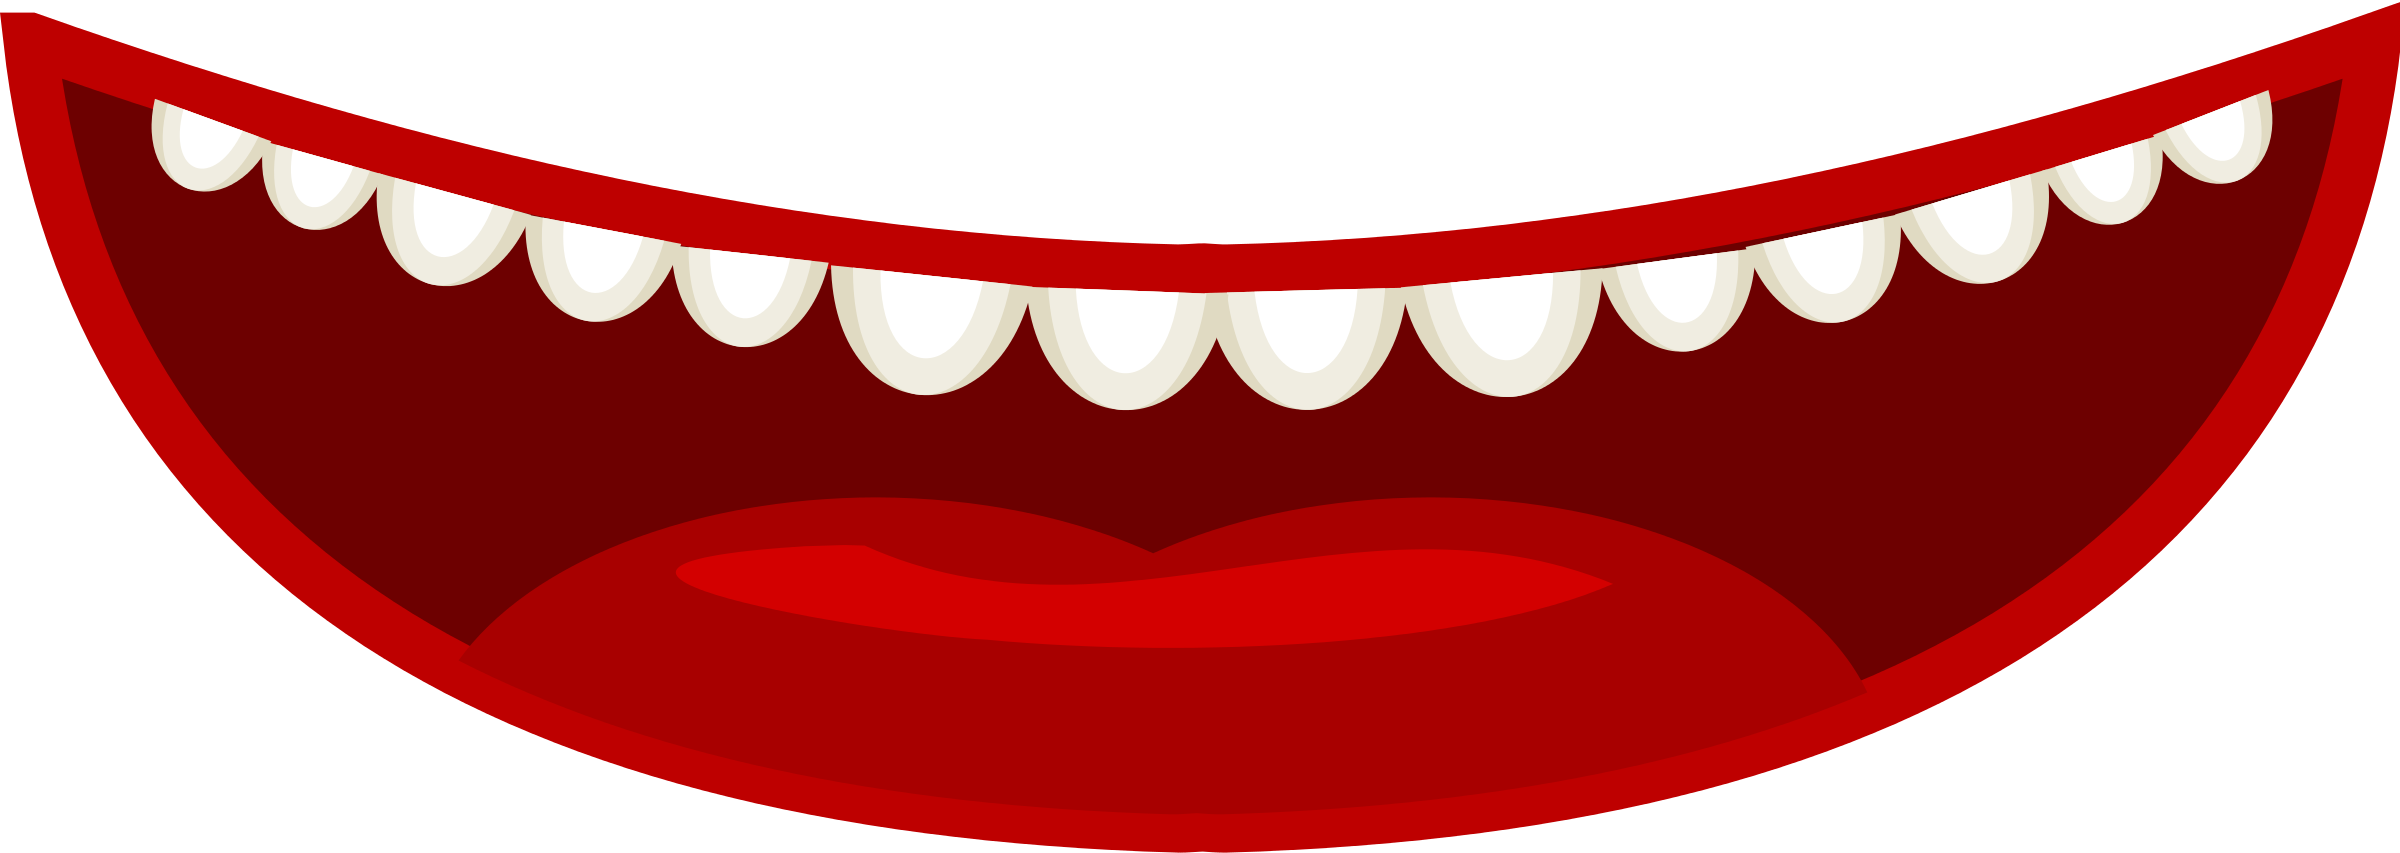 Images For > Cartoon Mouth Clip Art